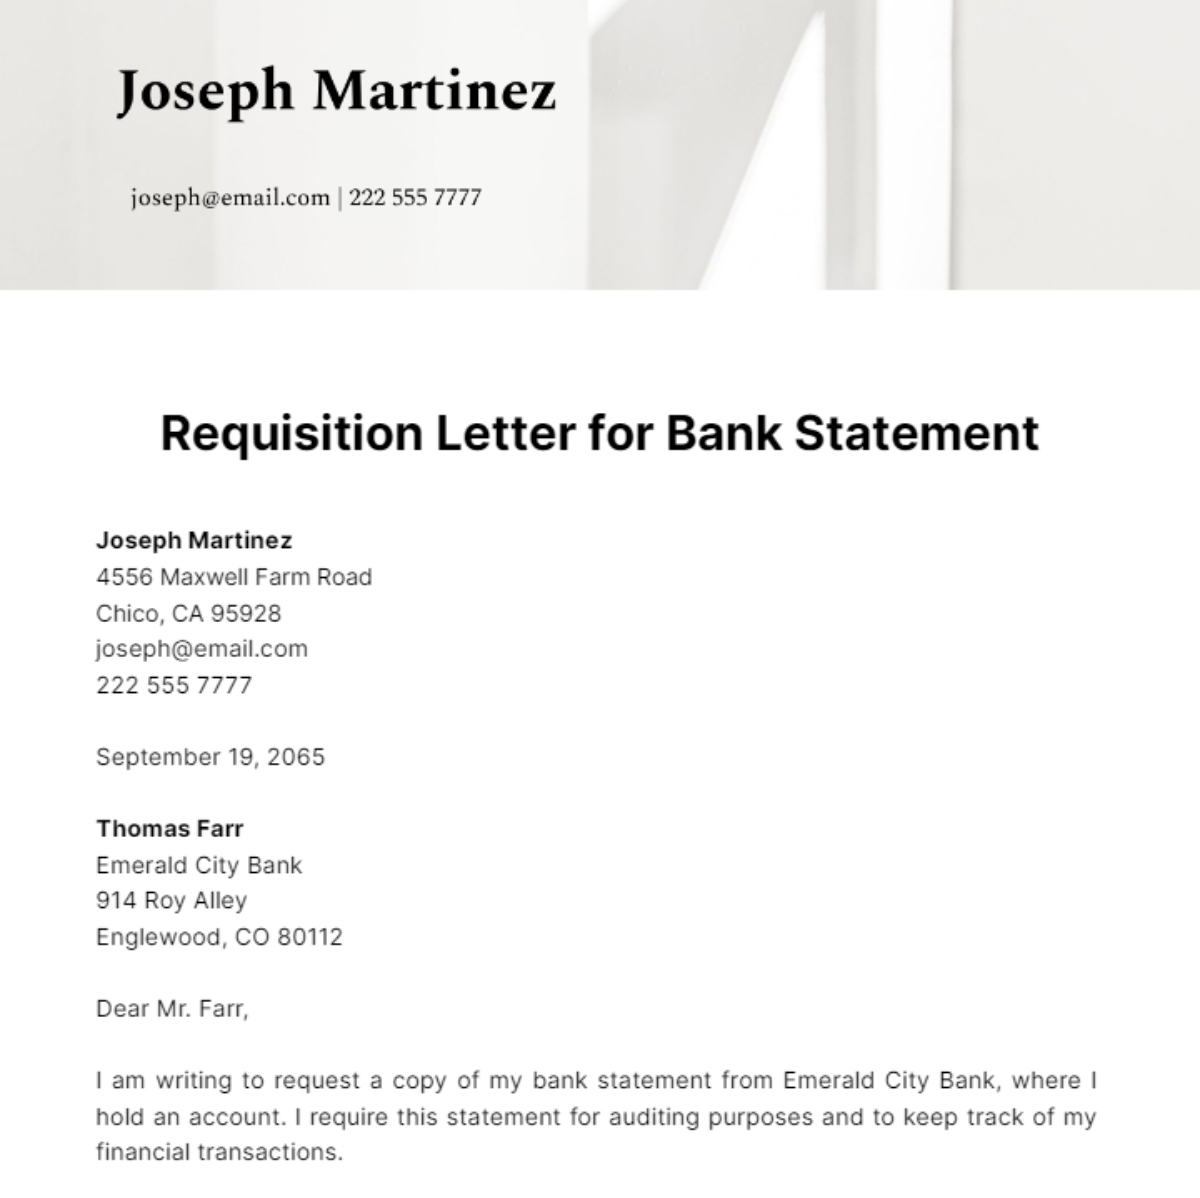 Requisition Letter for Bank Statement Template